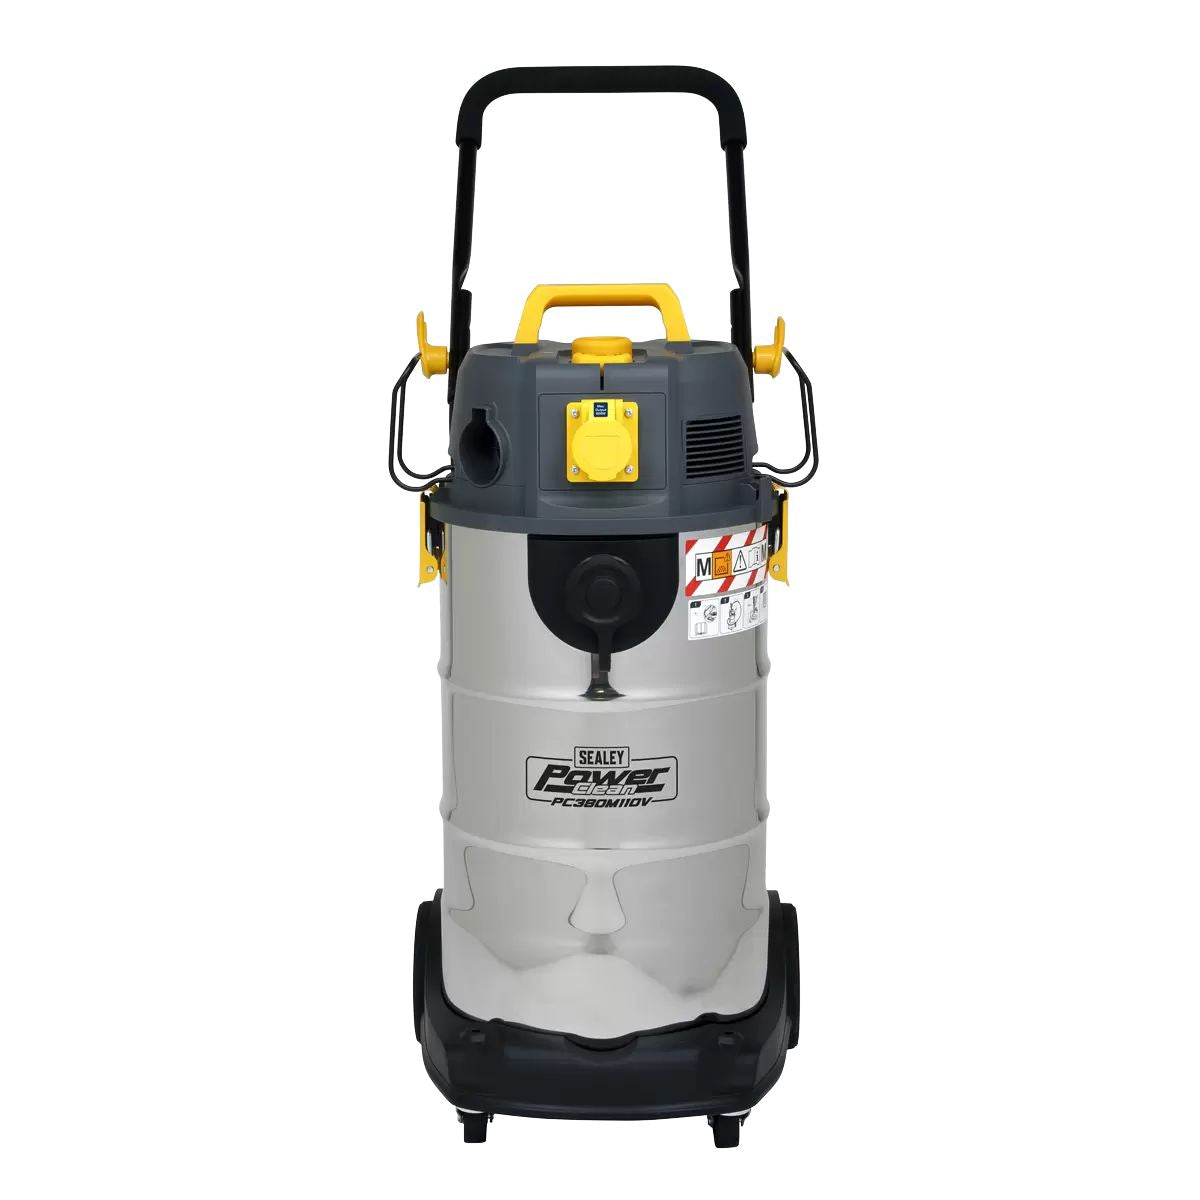 Sealey PC380M110V Vacuum Cleaner Industrial Dust-Free Wet/Dry 38L 1100W/110V Stainless Steel Drum